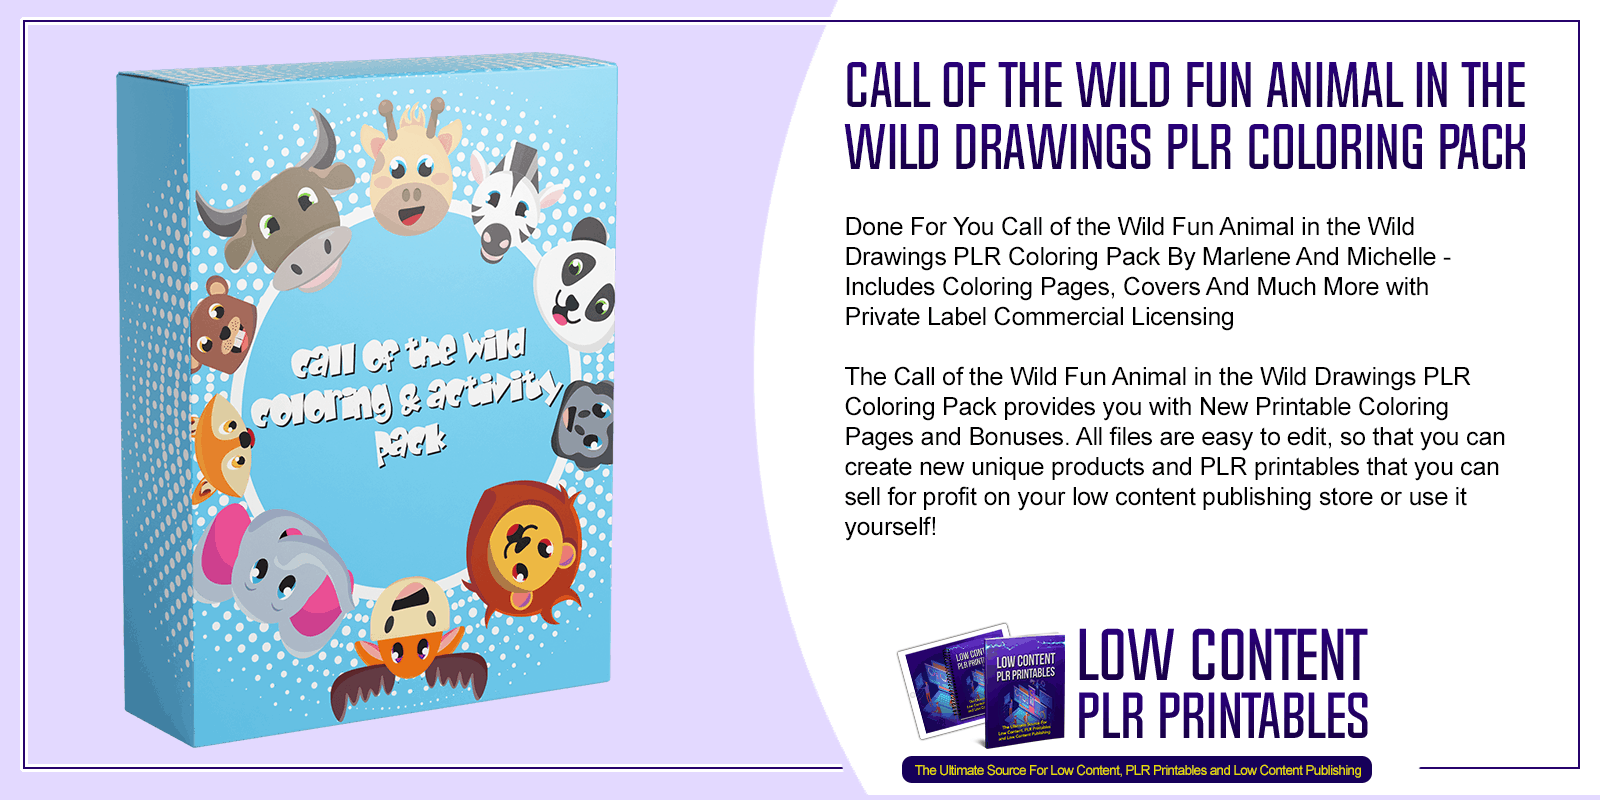 Call of the Wild Fun Animal in the Wild Drawings PLR Coloring Pack